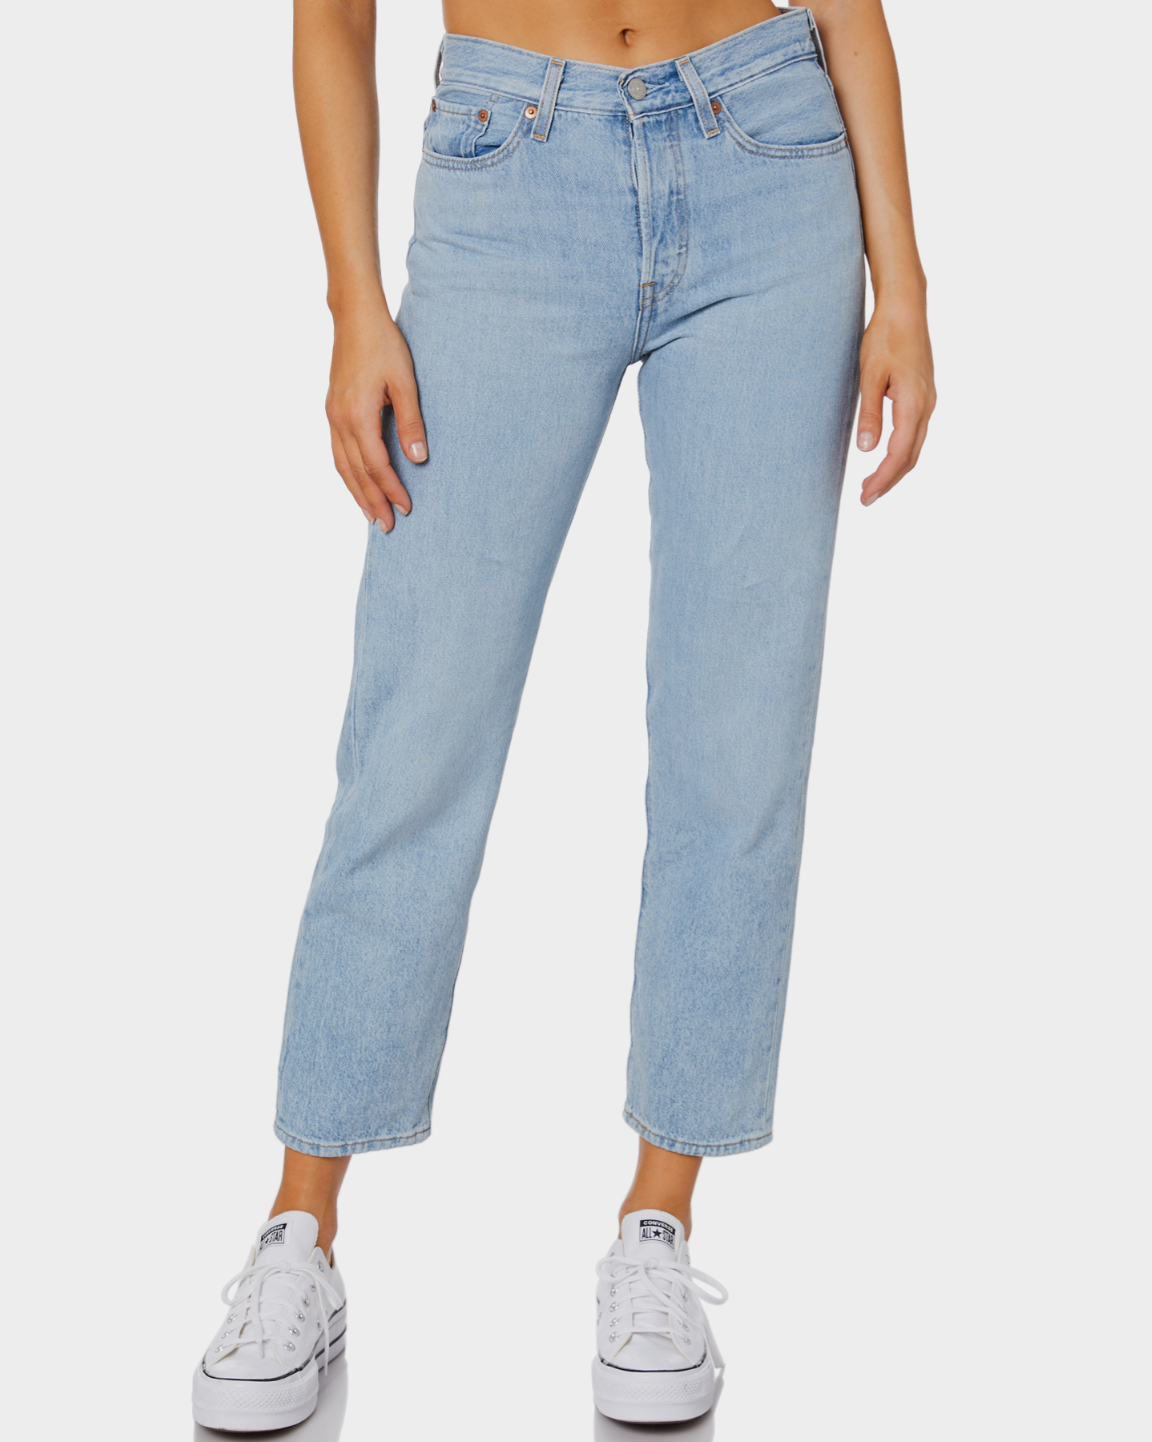 Levis - Wedgie Straight - Montgomery Baked – Star Road Trader